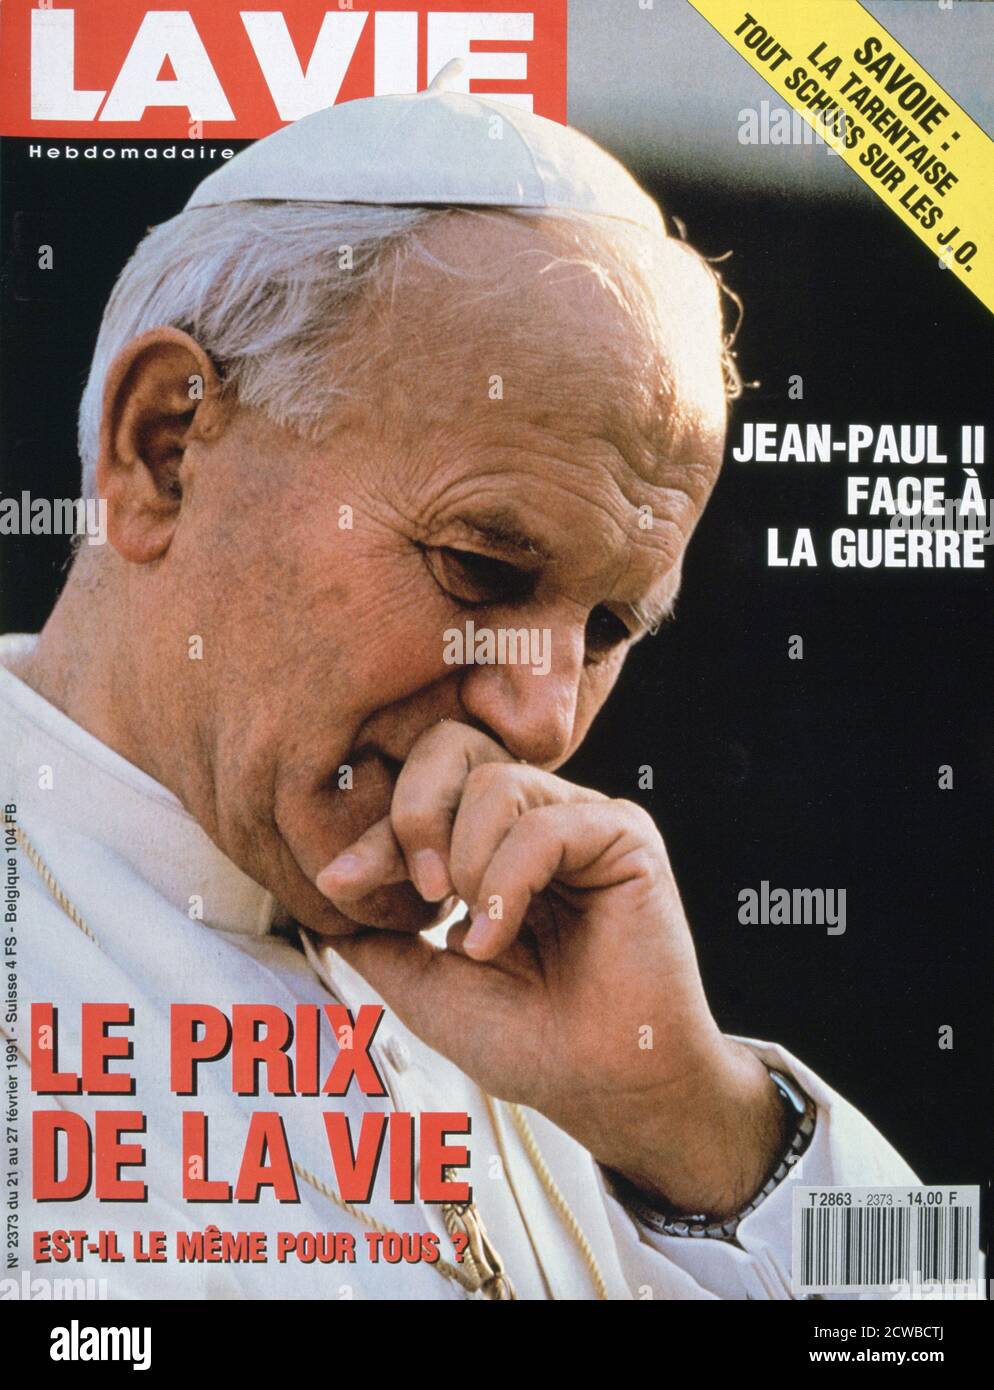 Front cover of La Vie, Febuary 1991. The cover shows Pope John Paul II at the time of the First Gulf War. The photographer is unknown. Rights information: Cleared for Editorial Use Only. Please Contact Us For Any Other Clearance Rights. Stock Photo